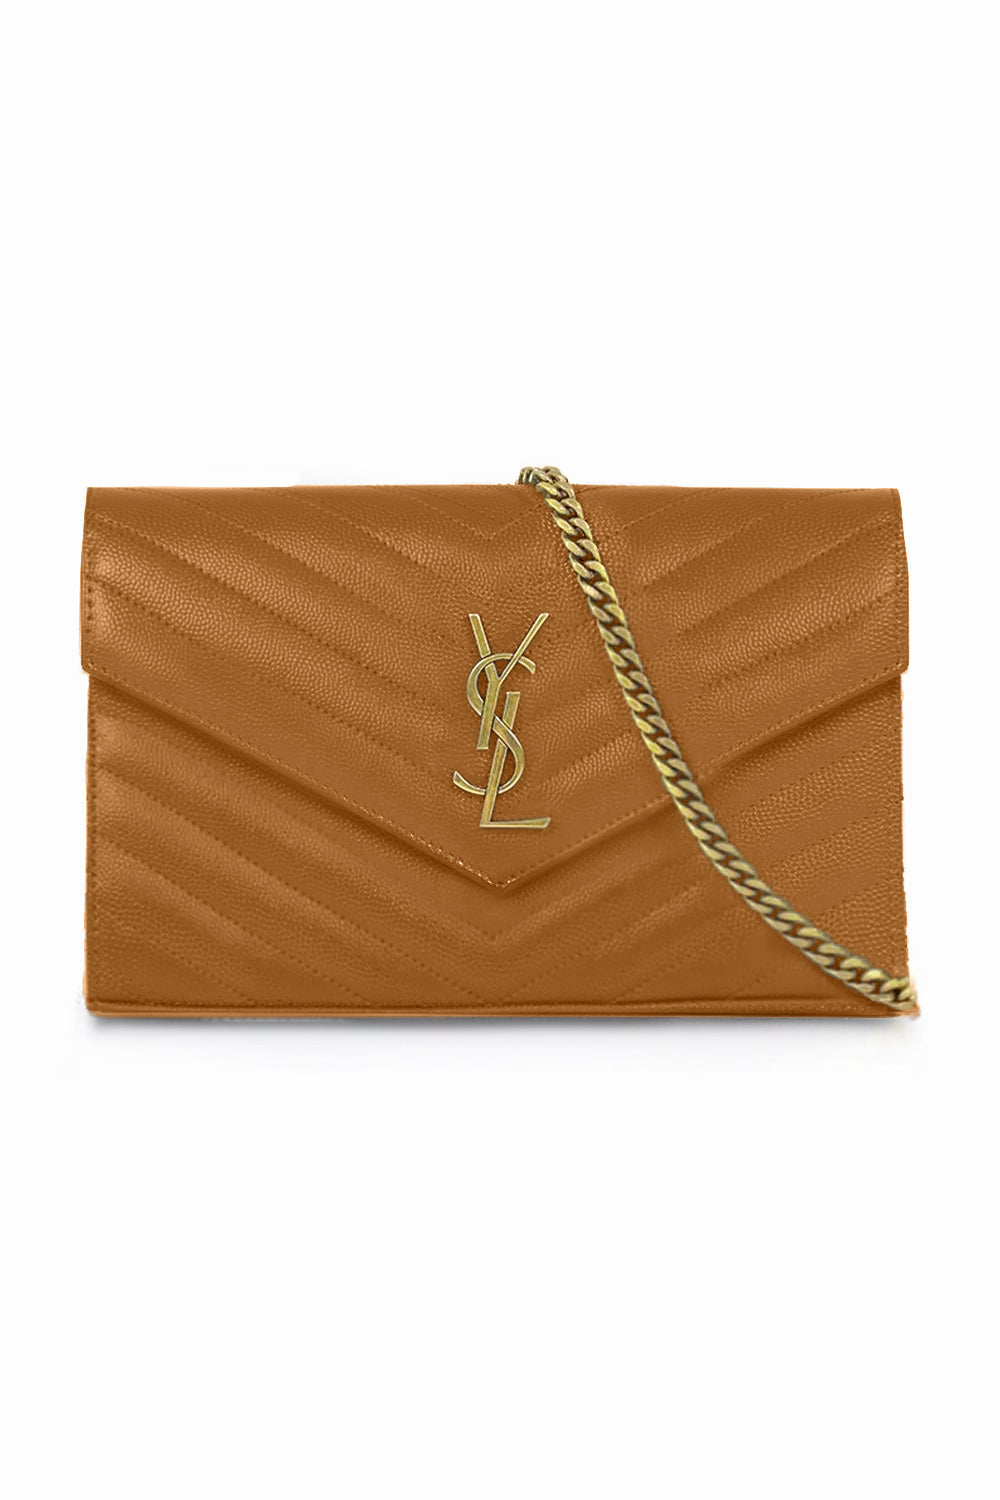 SAINT LAURENT BAGS BROWN SMALL MONOGRAMME QUILTED CHAIN WALLET | NATURAL DARK/GOLD